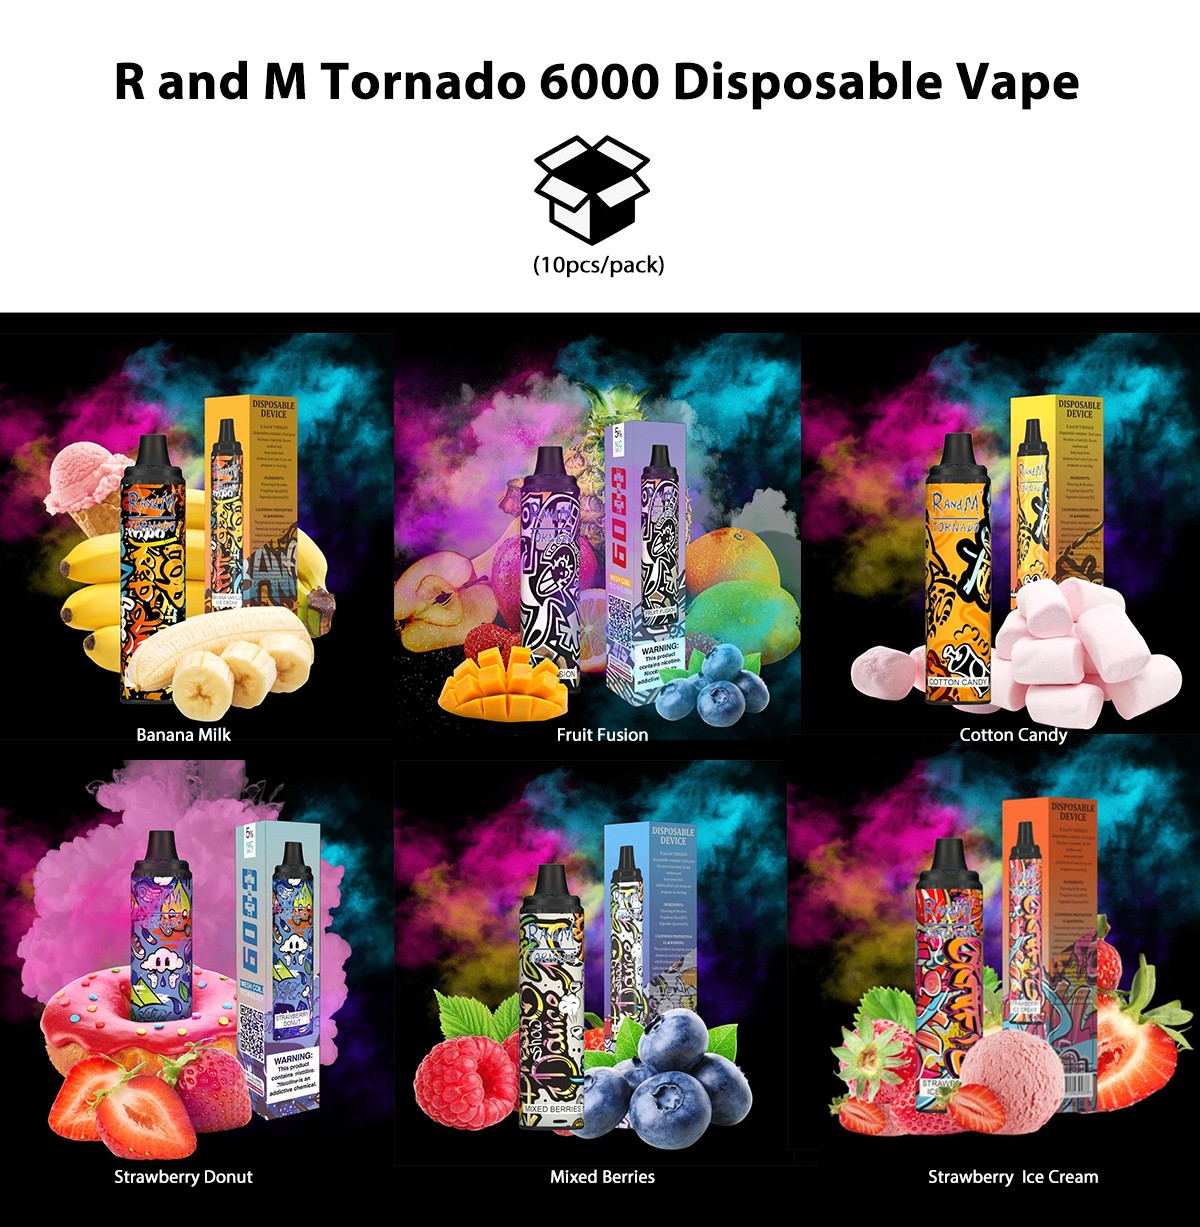 R and M Tornado 6000 Disposable